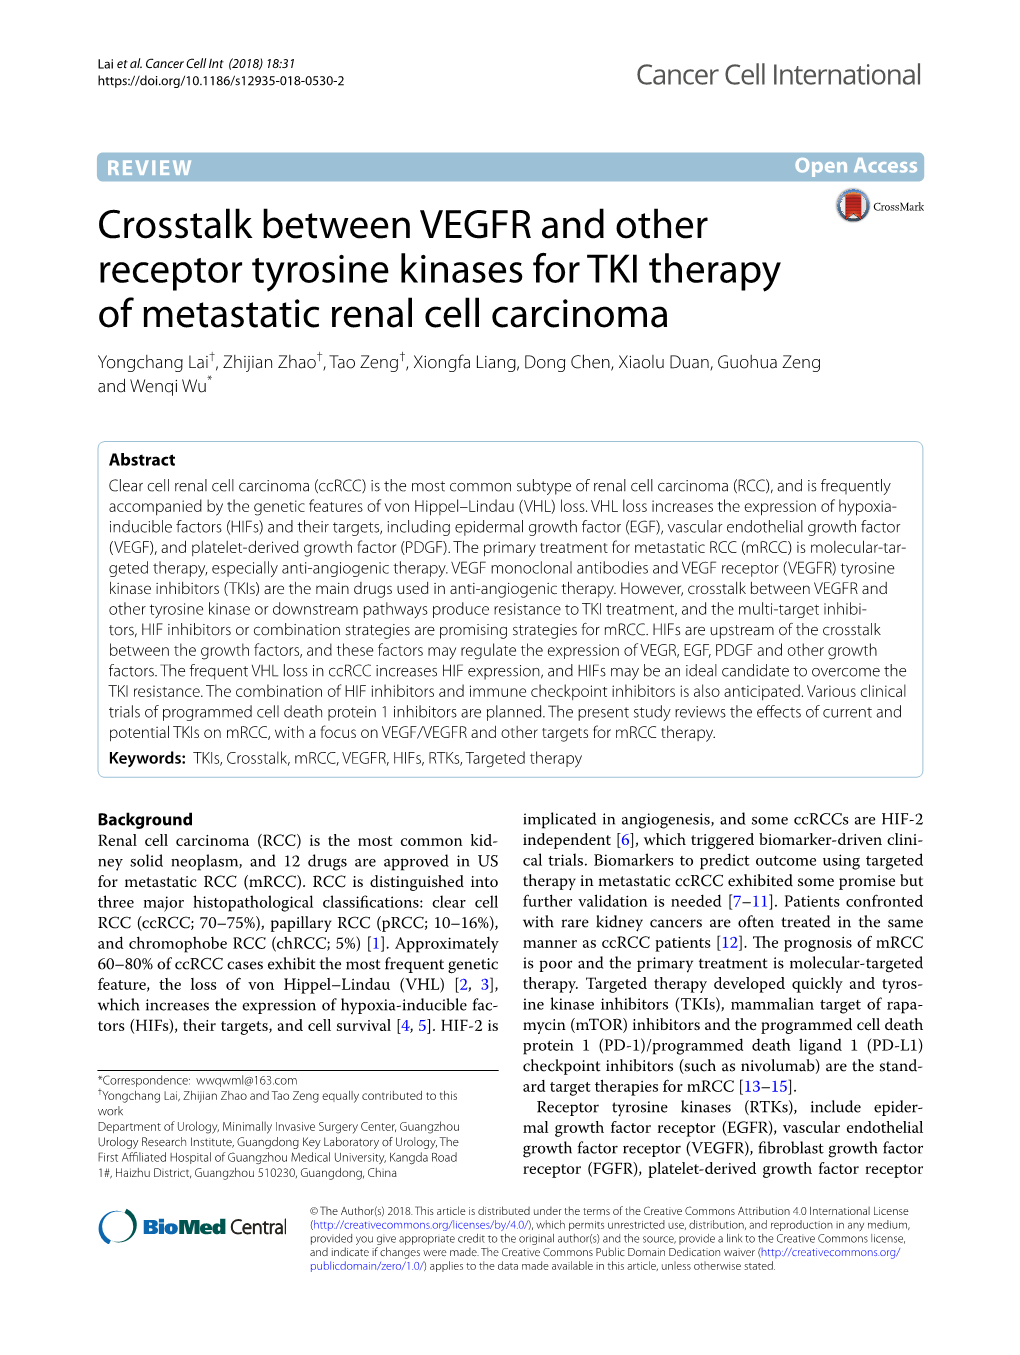 Crosstalk Between VEGFR and Other Receptor Tyrosine Kinases for TKI Therapy of Metastatic Renal Cell Carcinoma